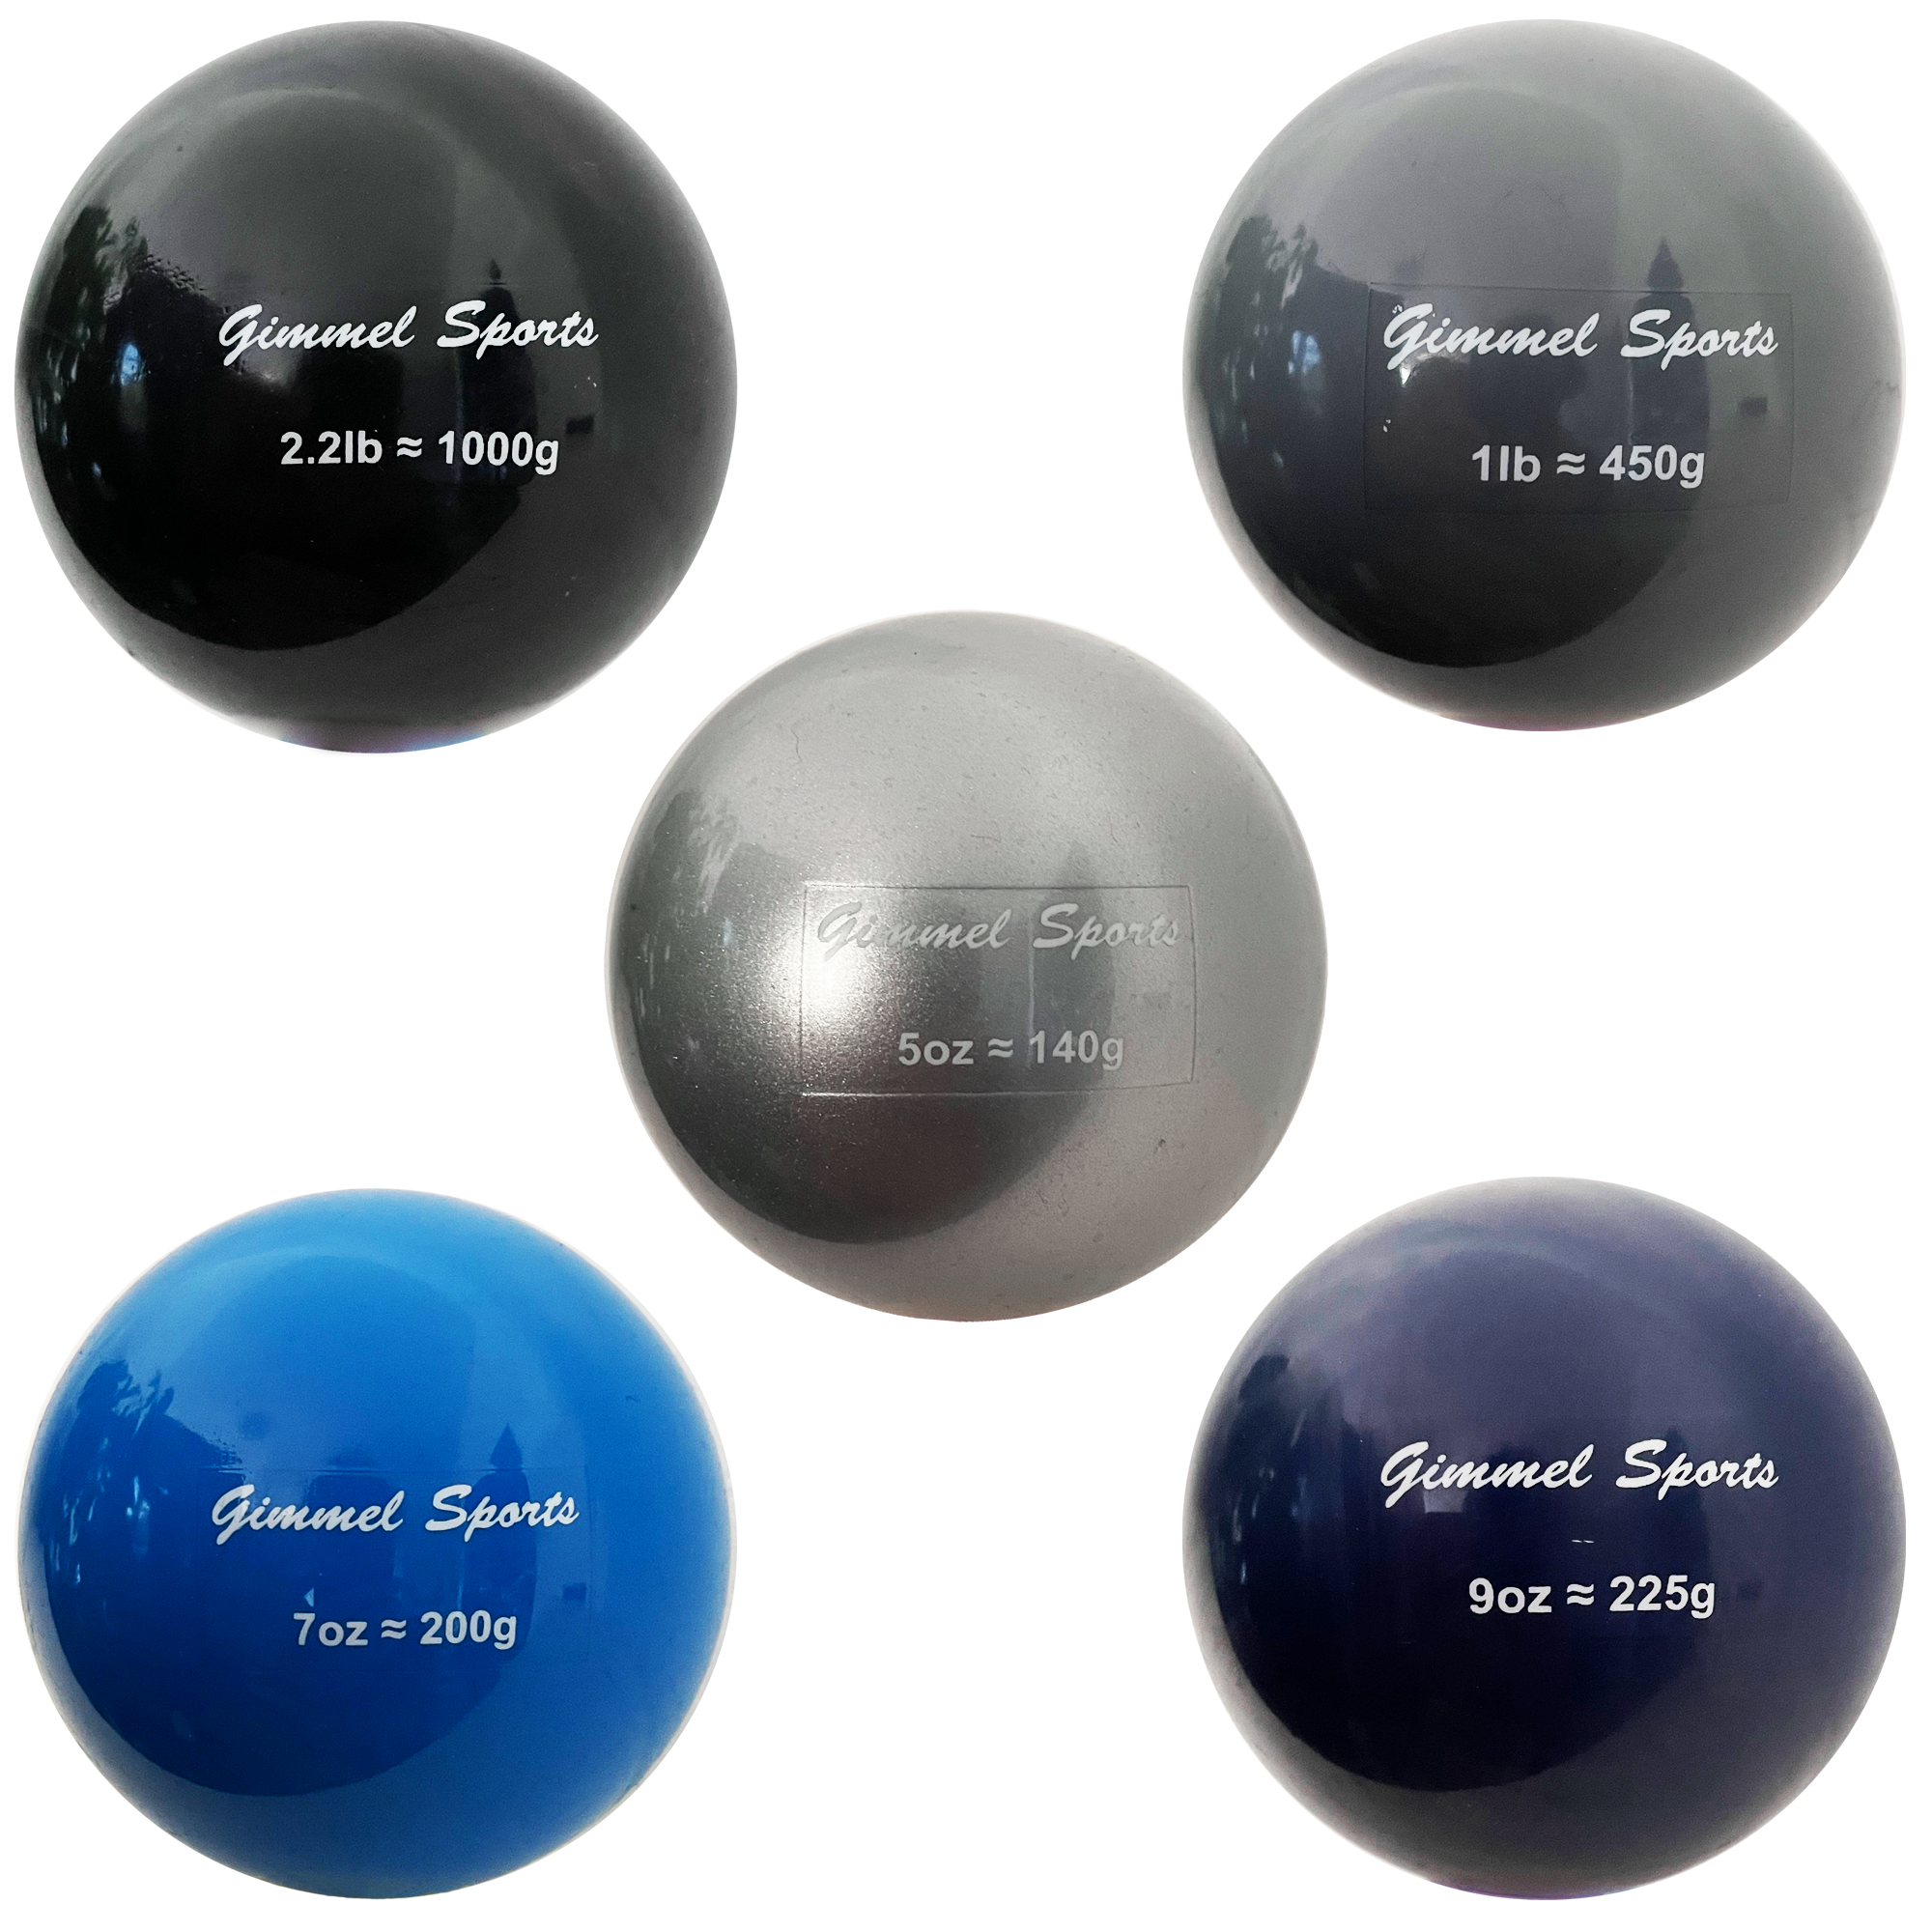 sports balls collage png